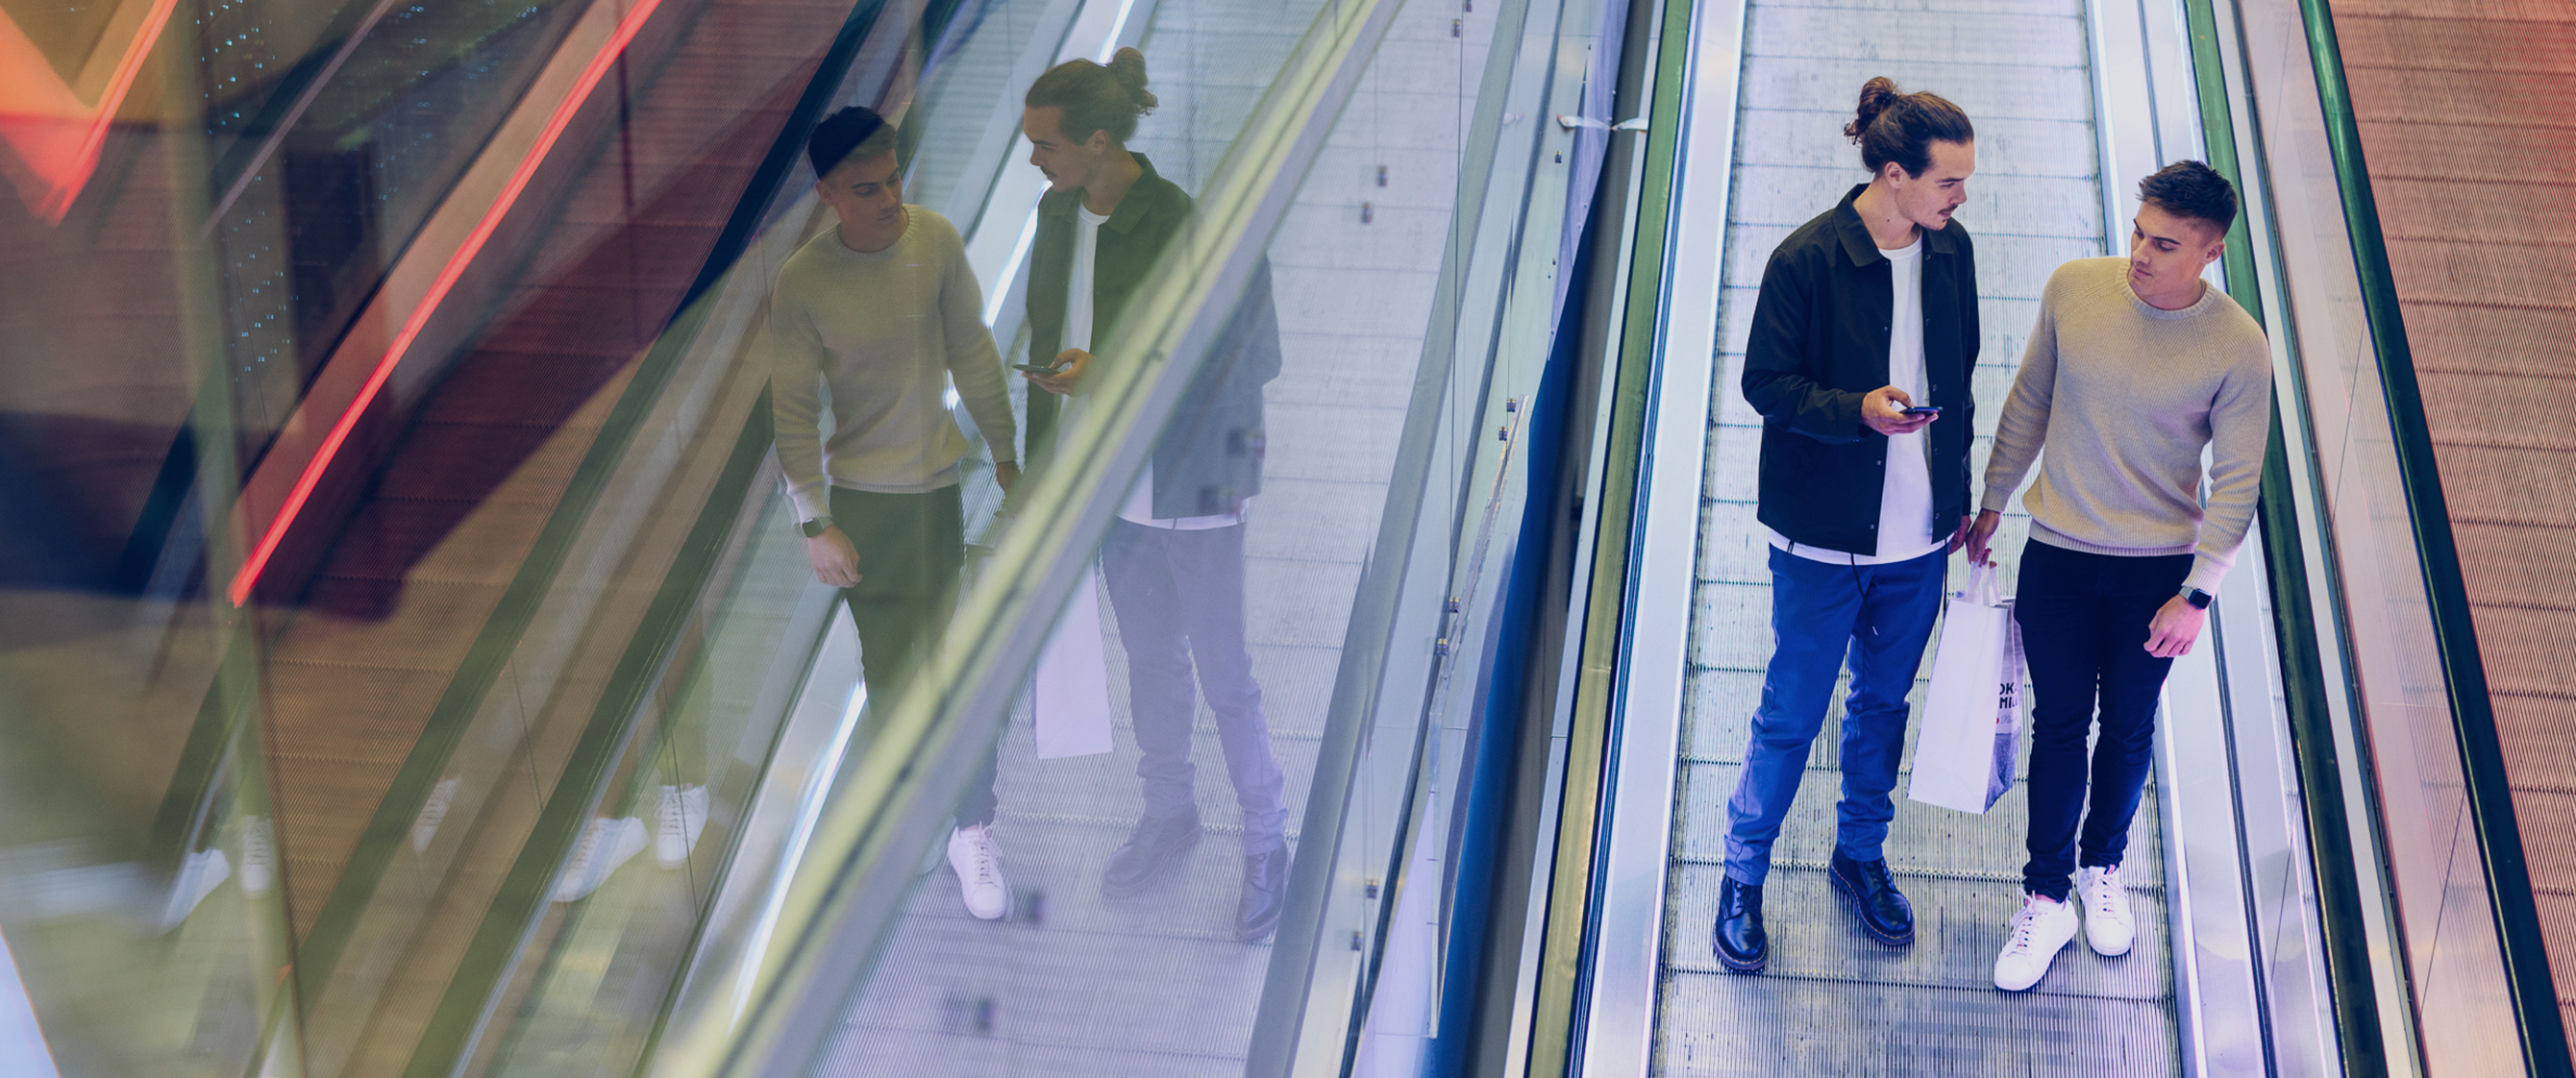 Two men standing in escaltor chatting. One of them is holding a phone.